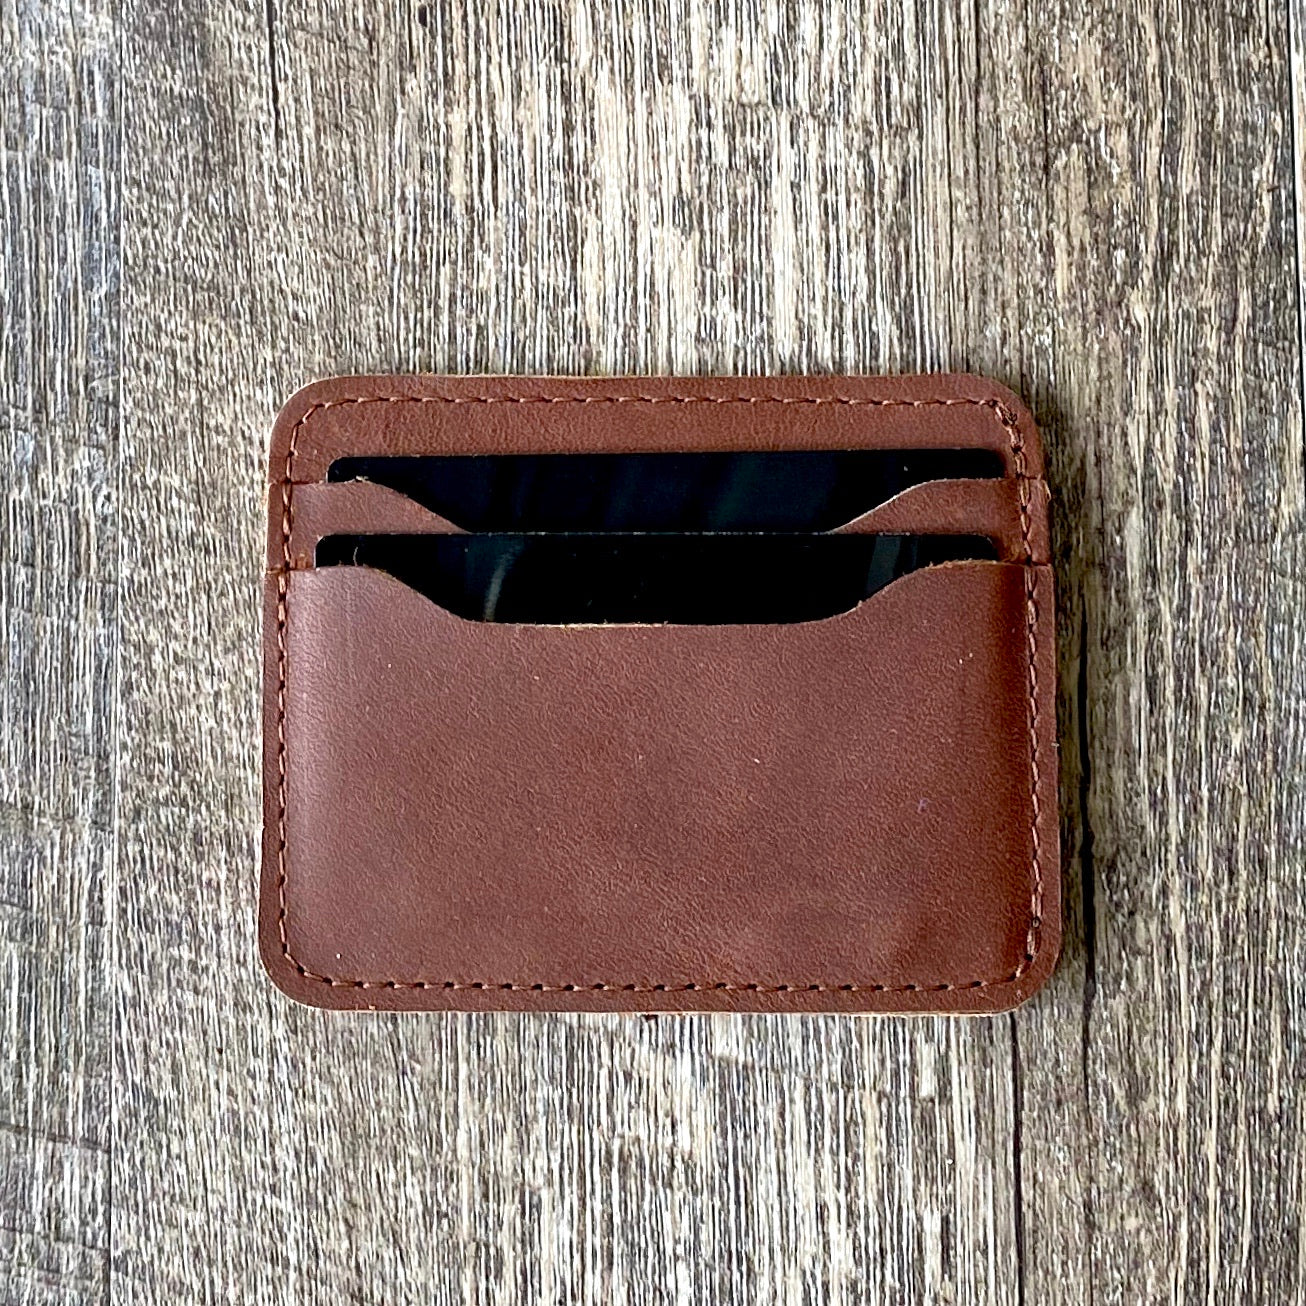 Pecu Leather Co. : Handmade Leather Goods from Texas